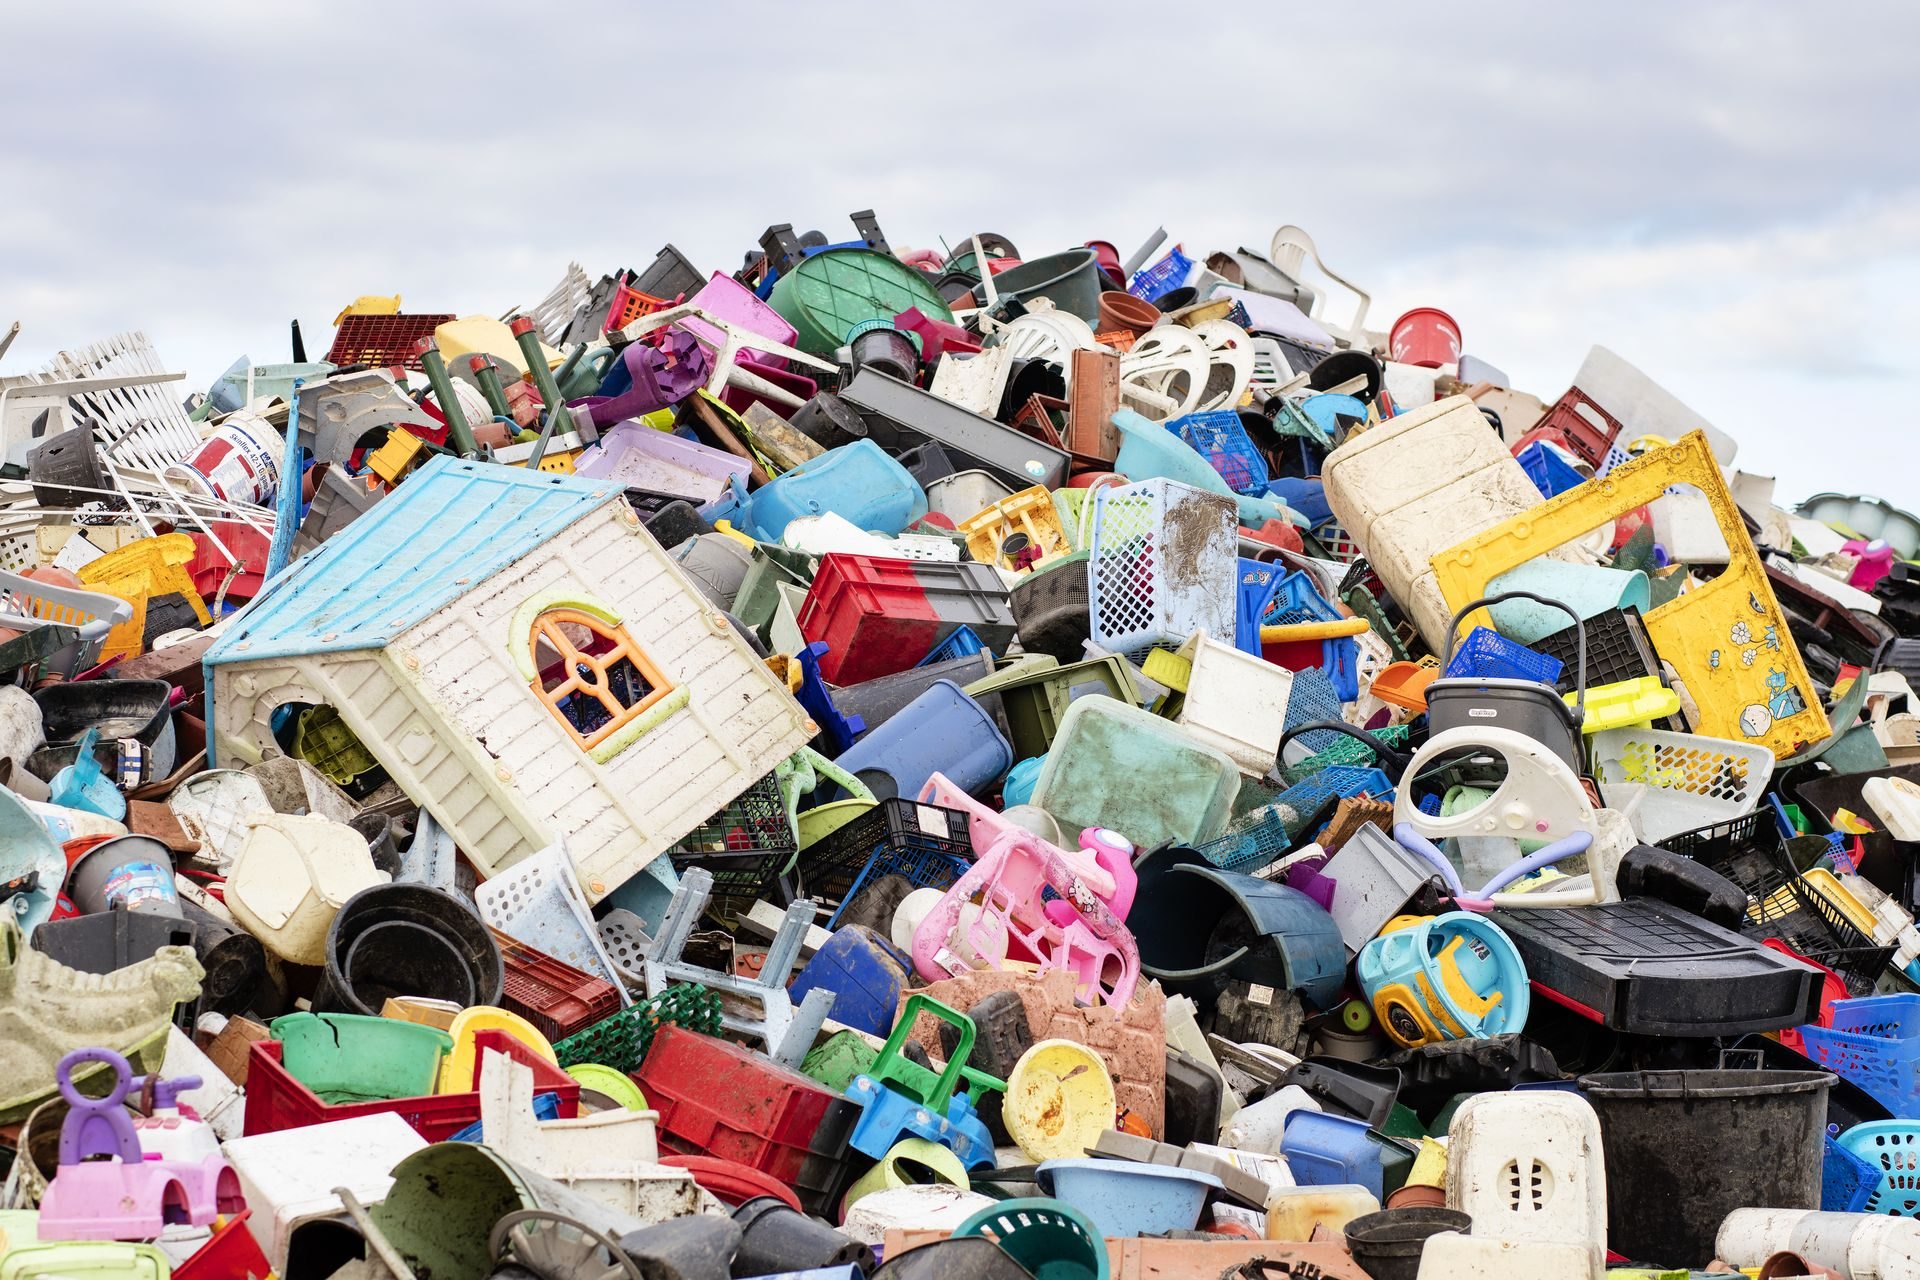 Recycling plastic using an enzyme: a miracle solution to drastically reduce pollution?